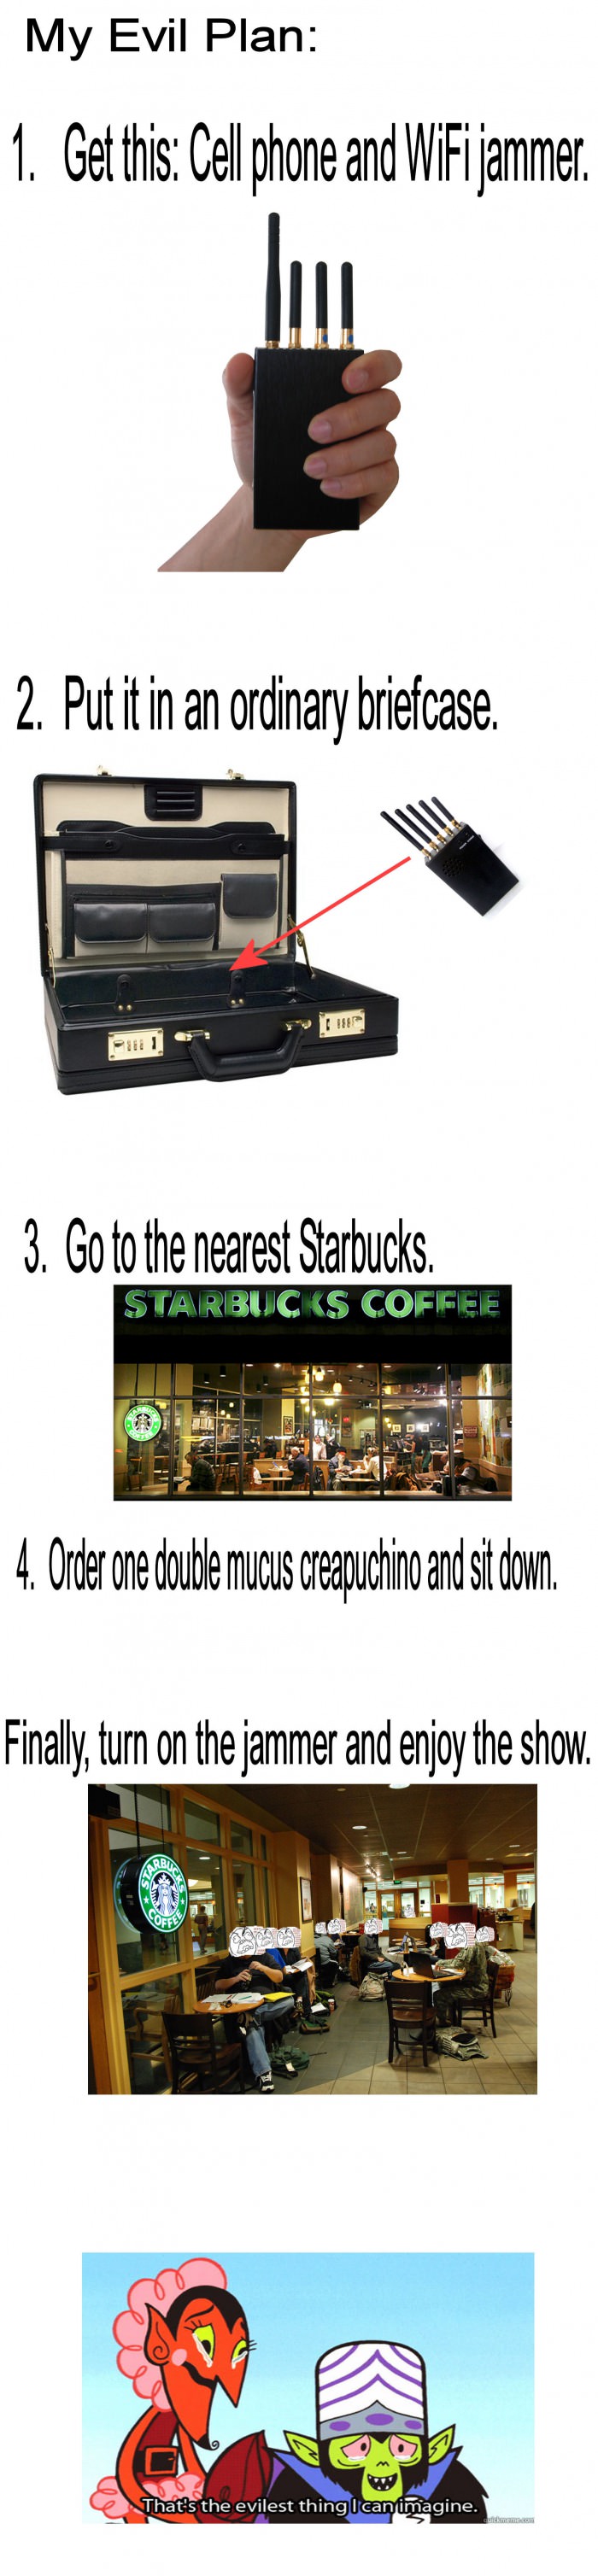 my evil plan to troll starbucks, cellphone and radio frequency jammer